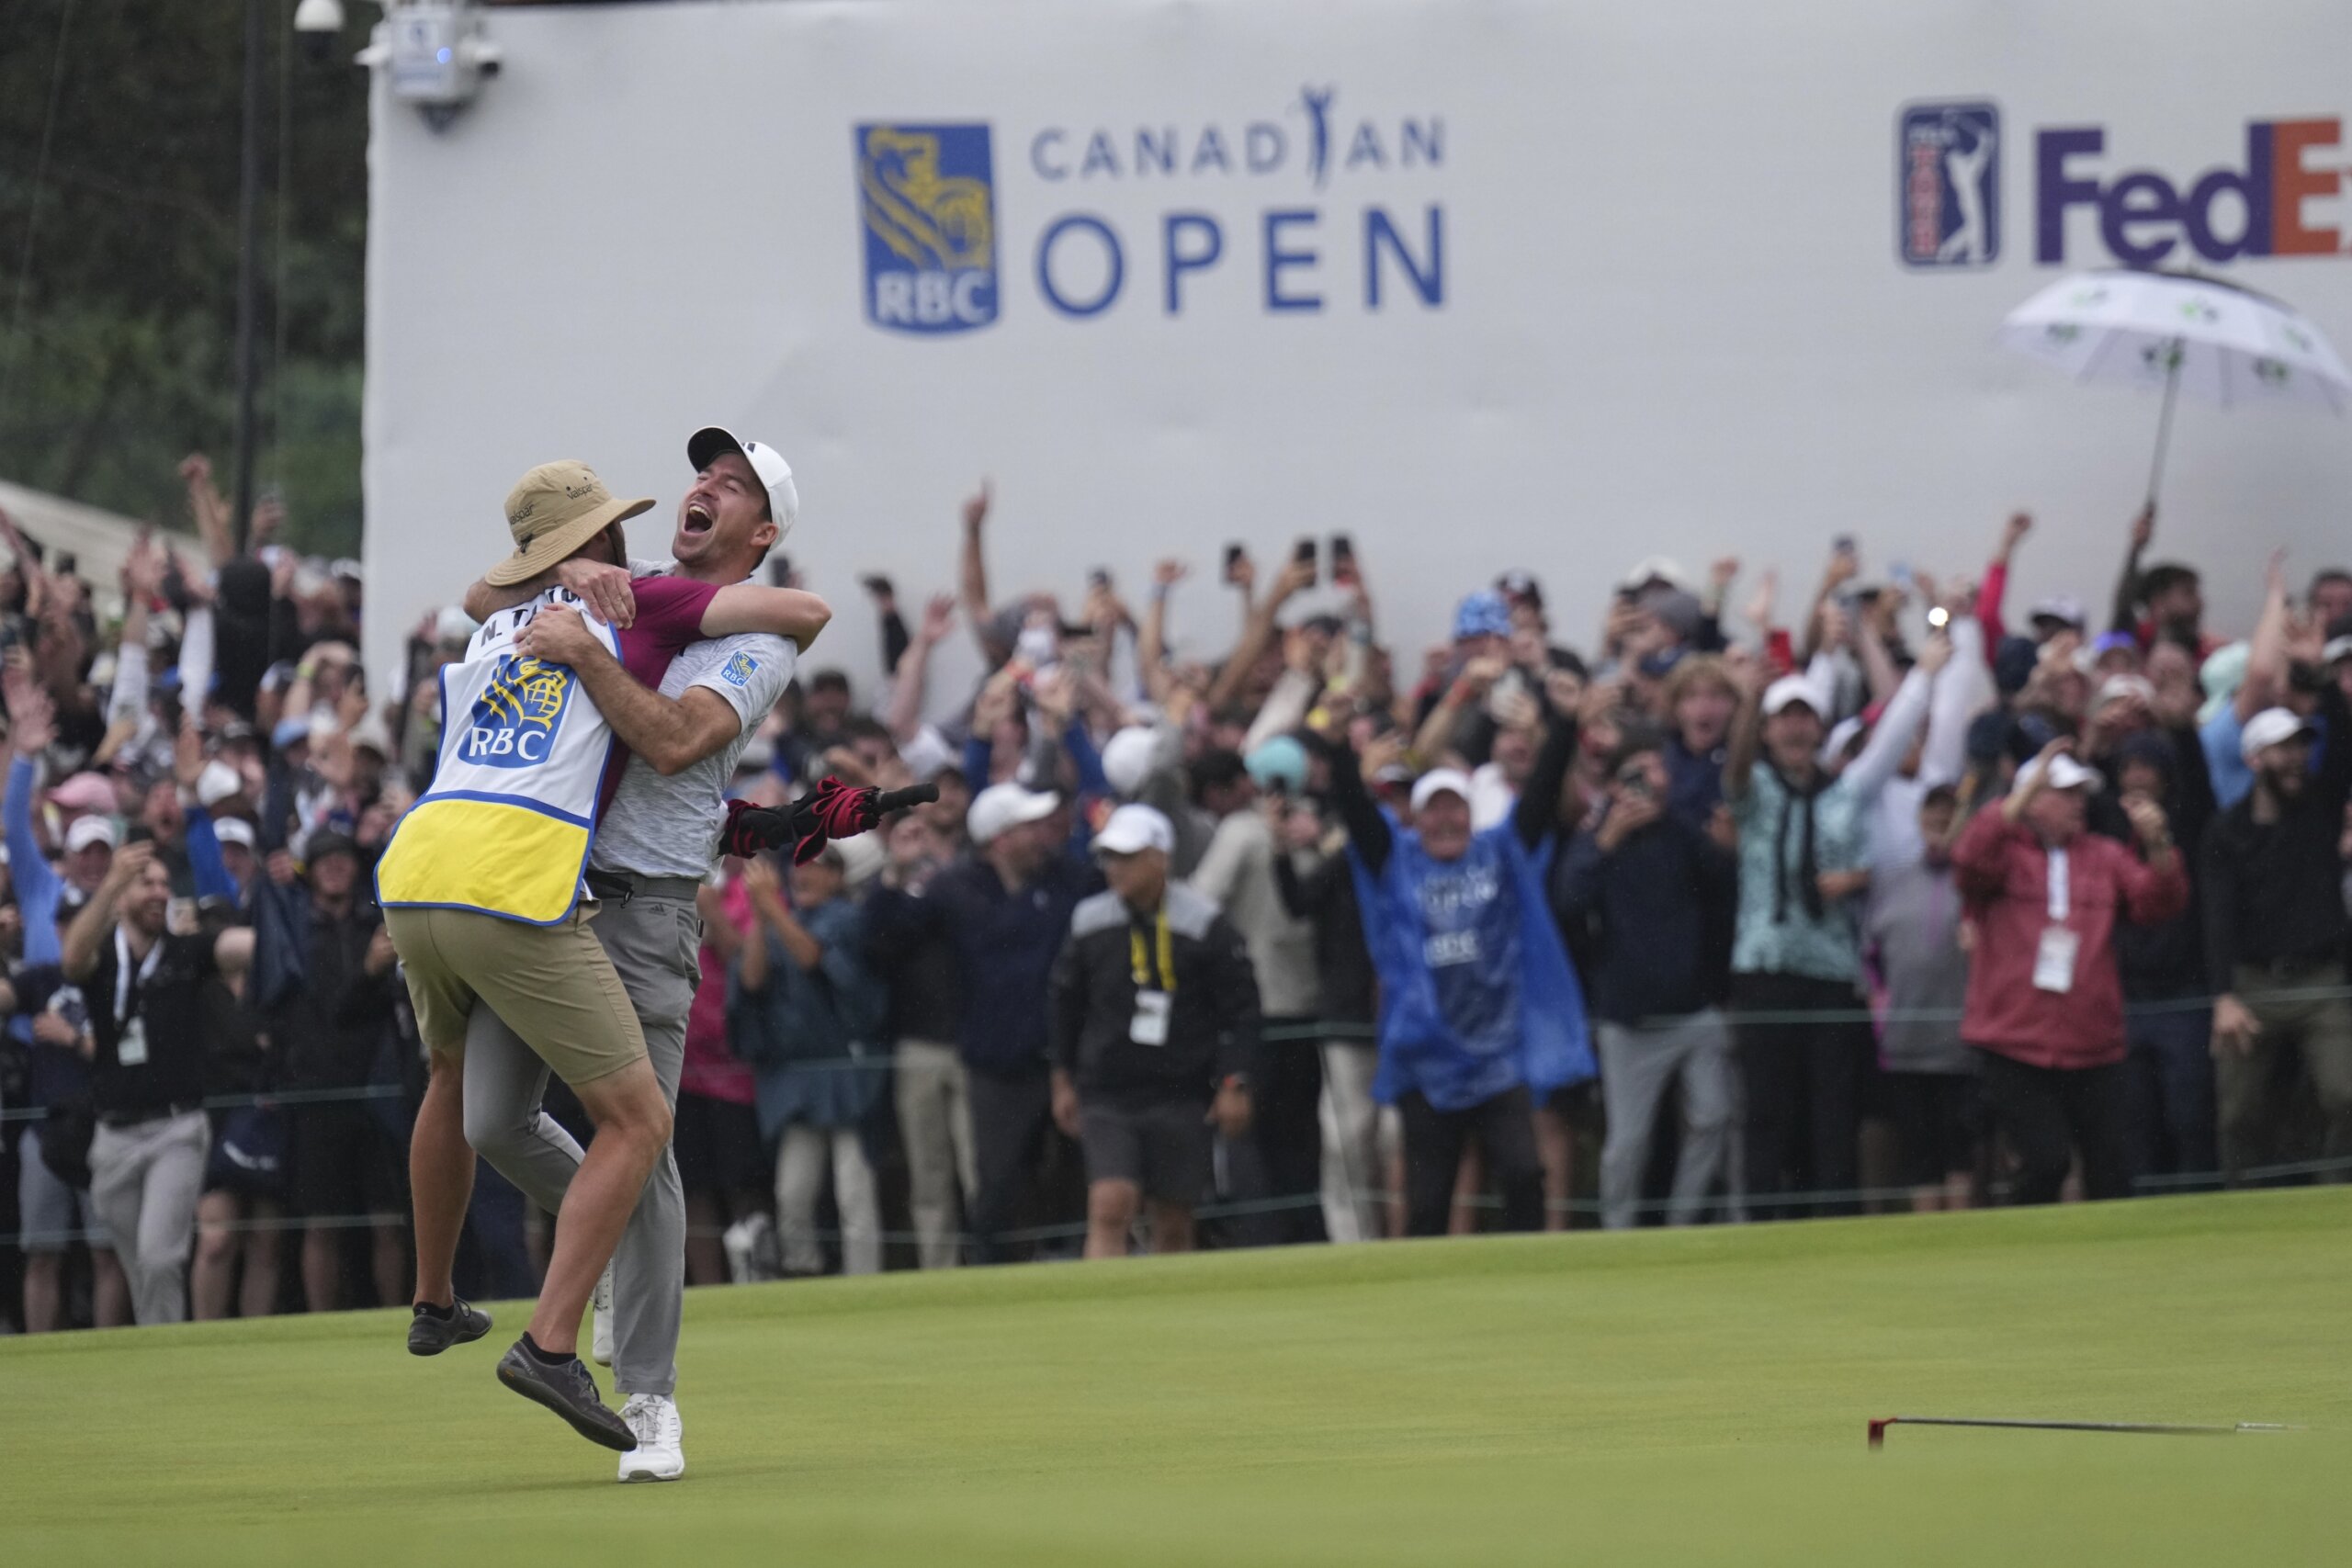 Nick Taylor sinks 72foot putt to win Canadian Open, countrymate Hadwin